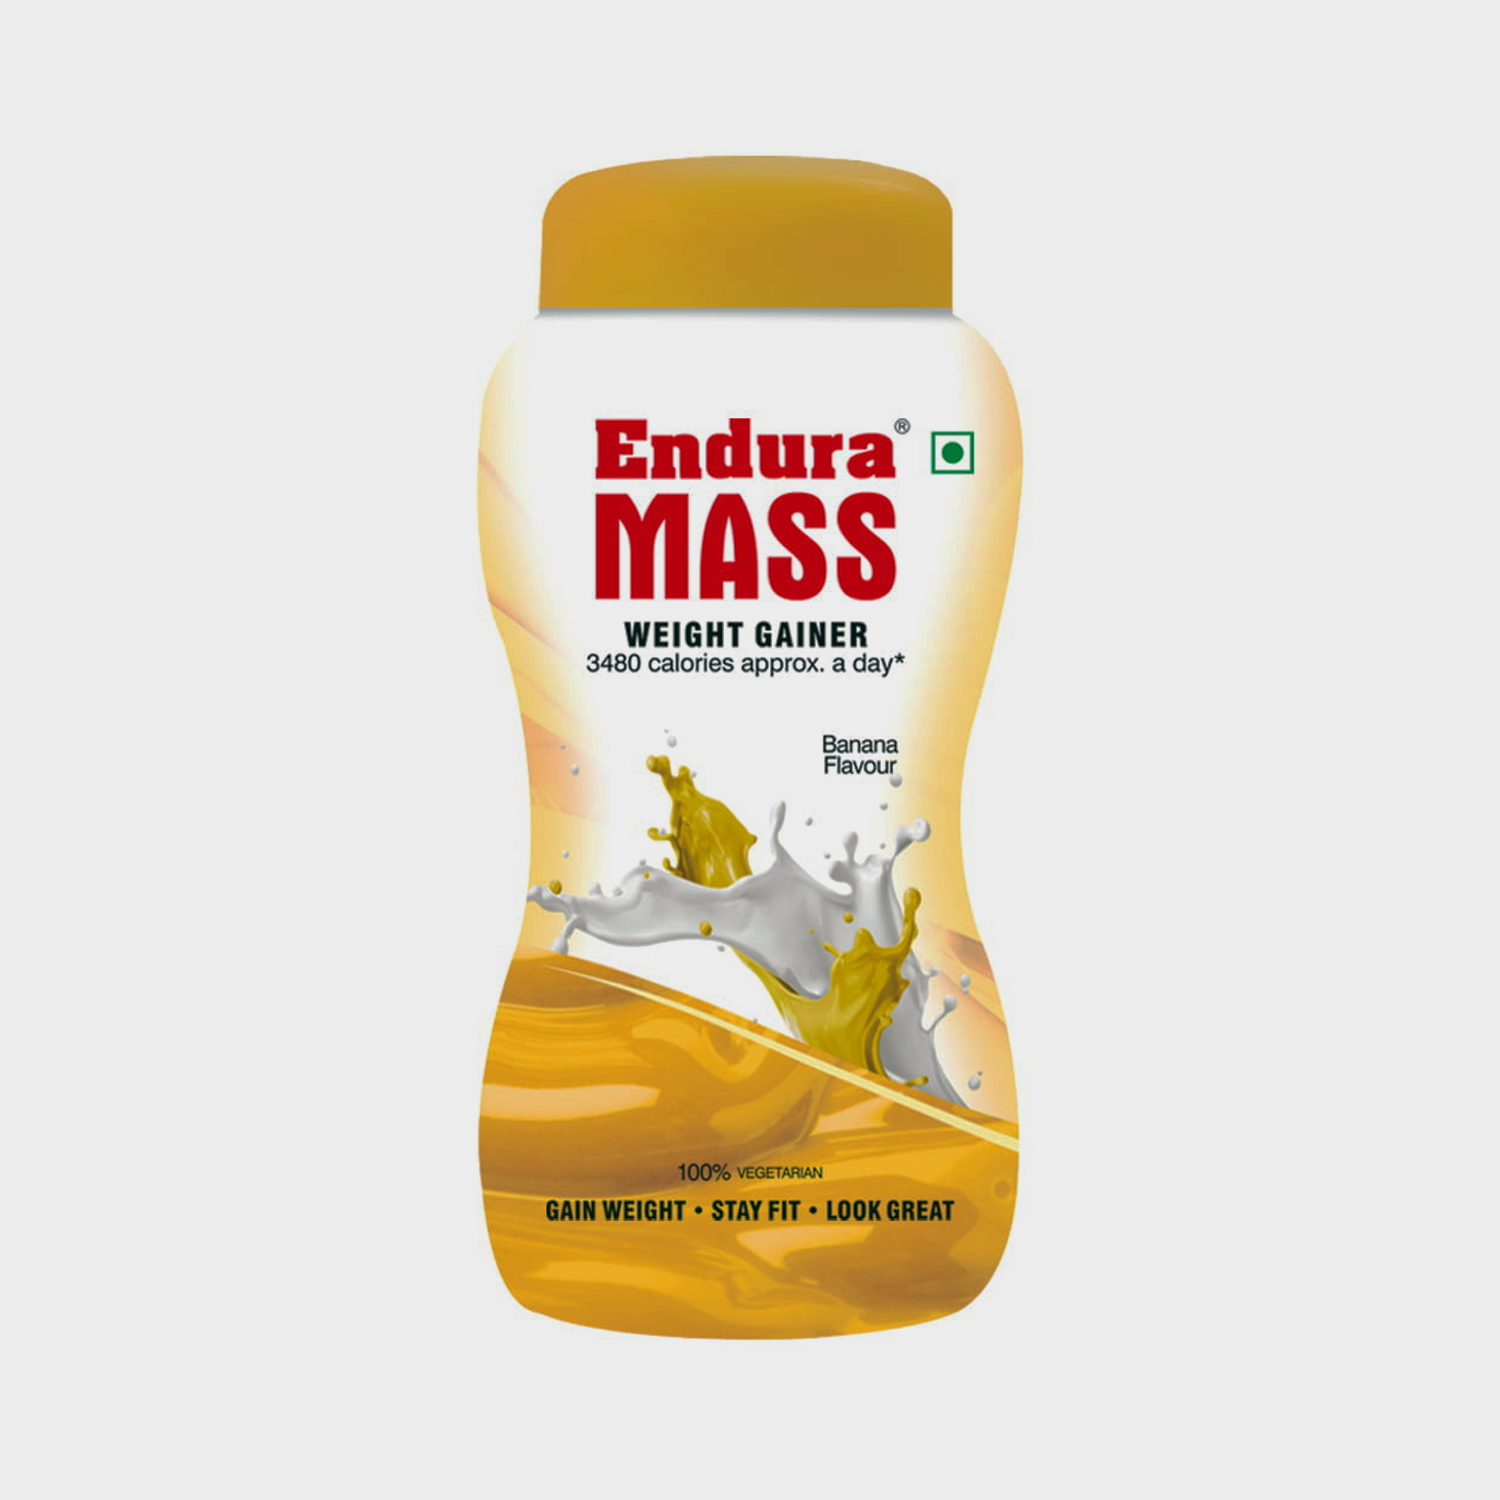 Endura Mass Weight Gainer | Mass Gainer | Gain Weight, Post Workout, 74 g Carbohydrate, 15 g Protein, Healthy Fats (Banana, 500 g)